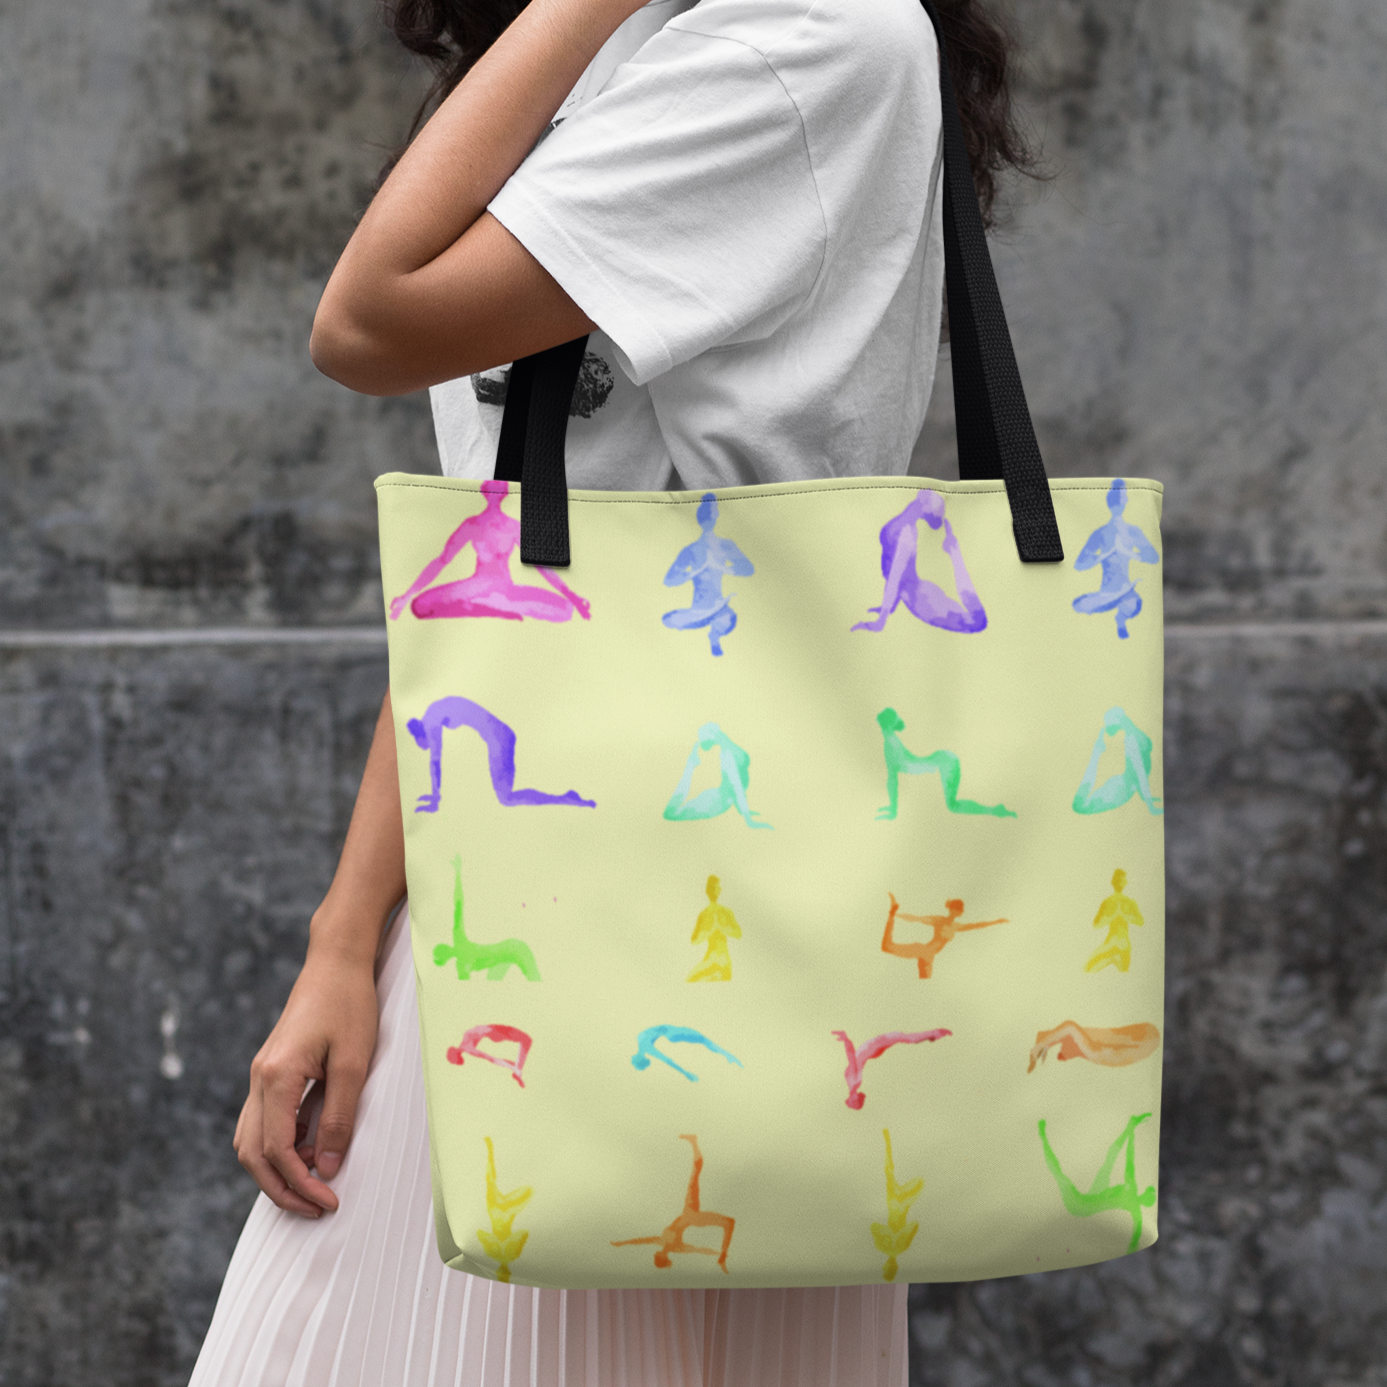 Yoga Sanctuary Everyday Yellow Tote BagYoga Sanctuary Everyday practical high quality Tote Bag.  Comfortable with style ideal for the beach or out in town. Made from reliable materials, lasting for seasonHandbagsEXPRESS WOMEN'S FASHIONYellow PandoraYoga Sanctuary Everyday Yellow Tote Bag